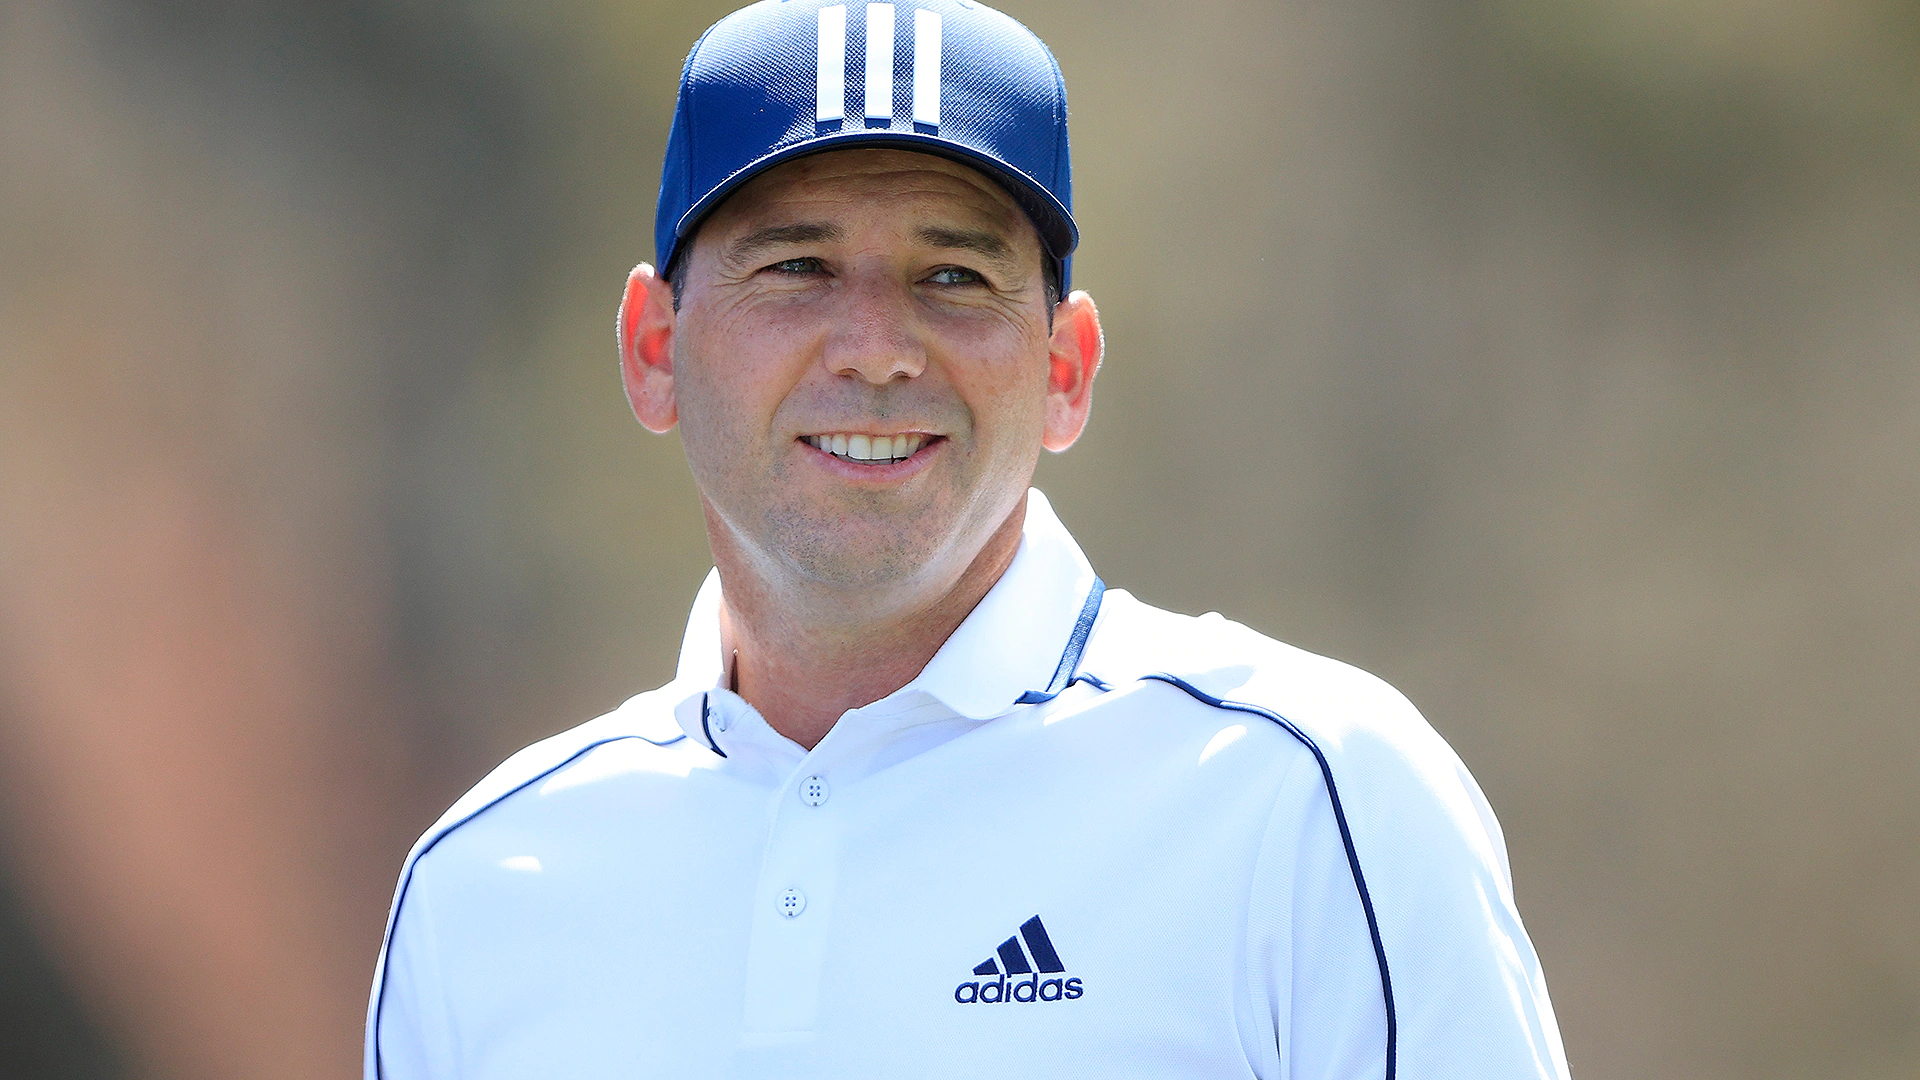 After missing Masters, Sergio Garcia back in major mode with 65 at 2021 Players